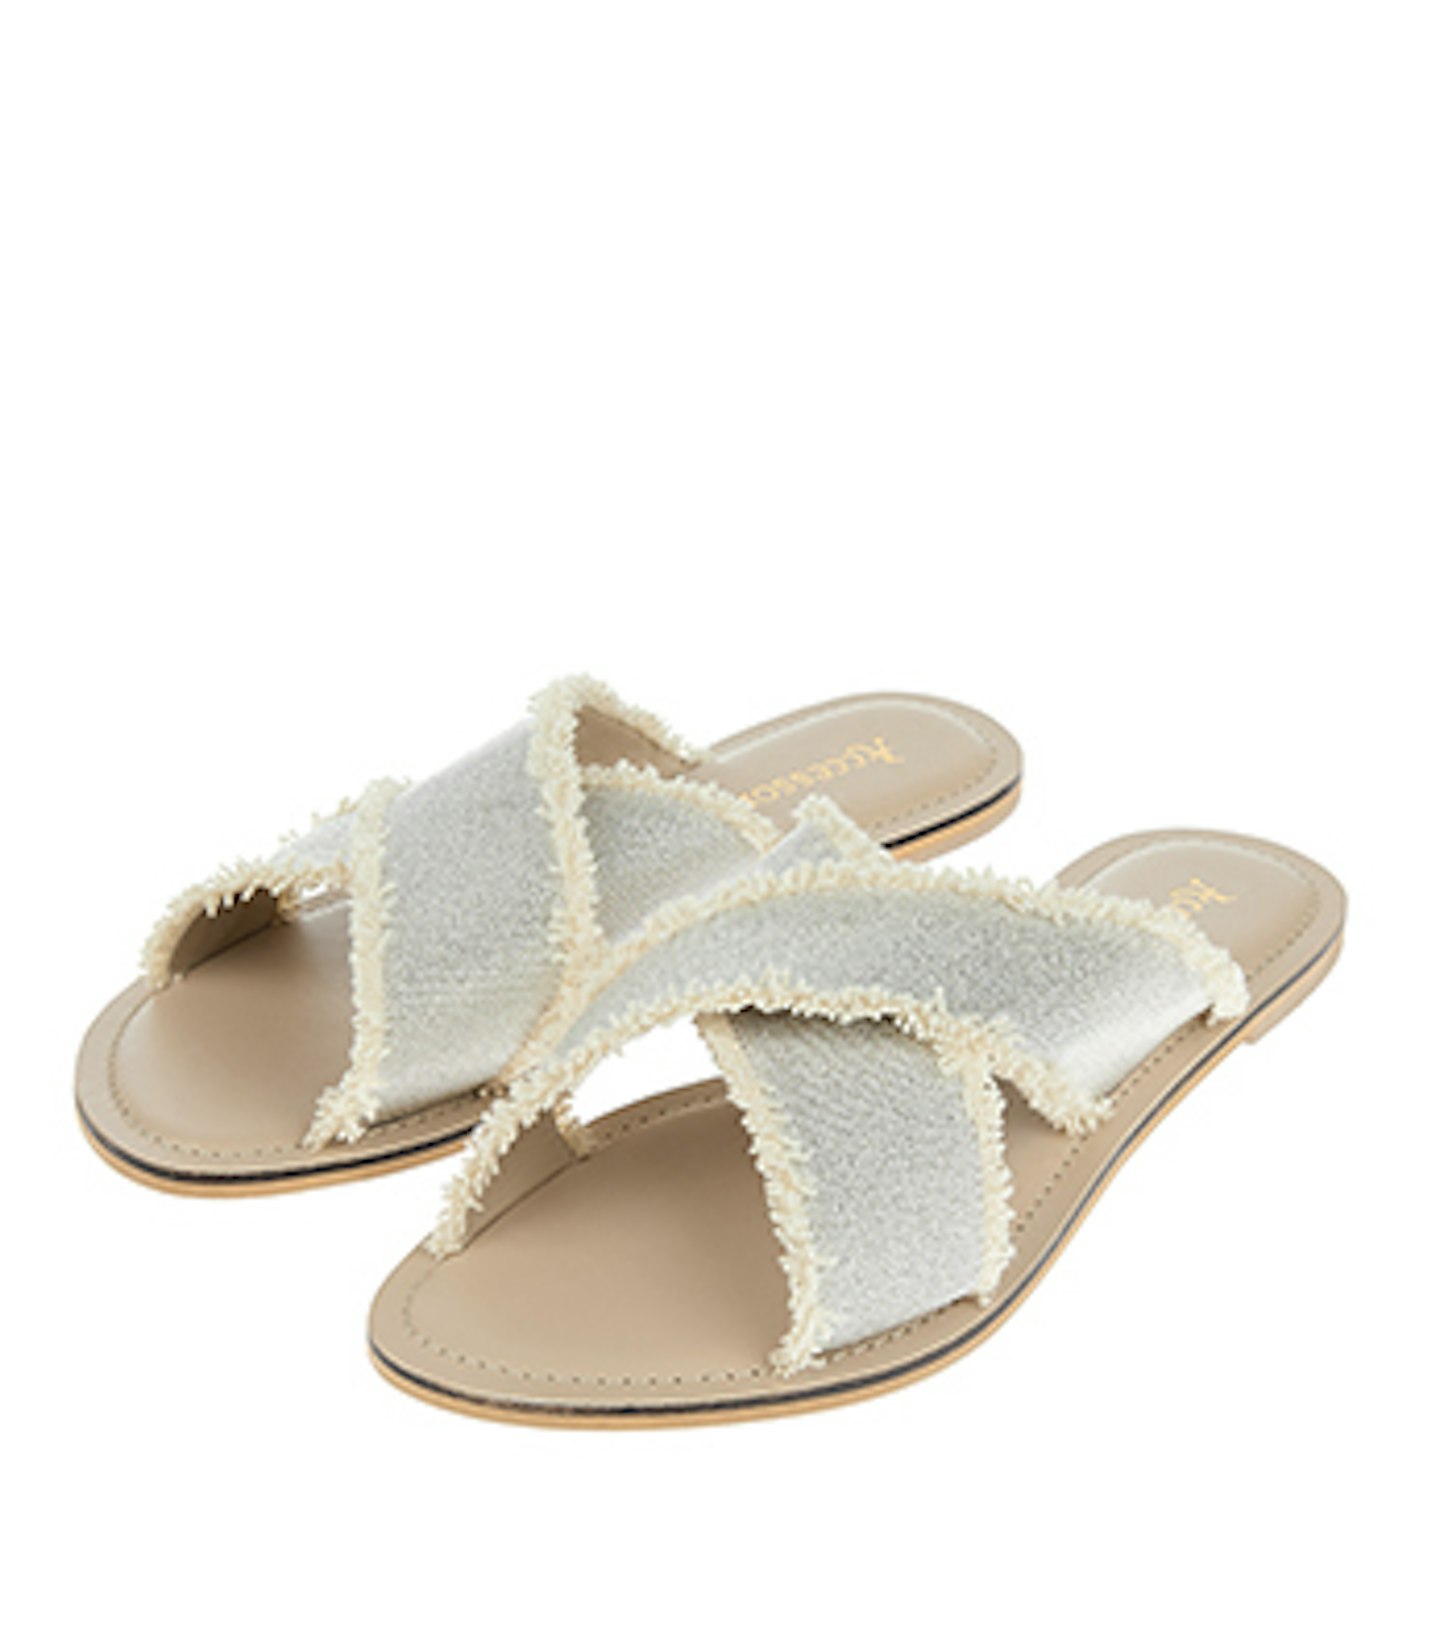 frayed sliders accessorize